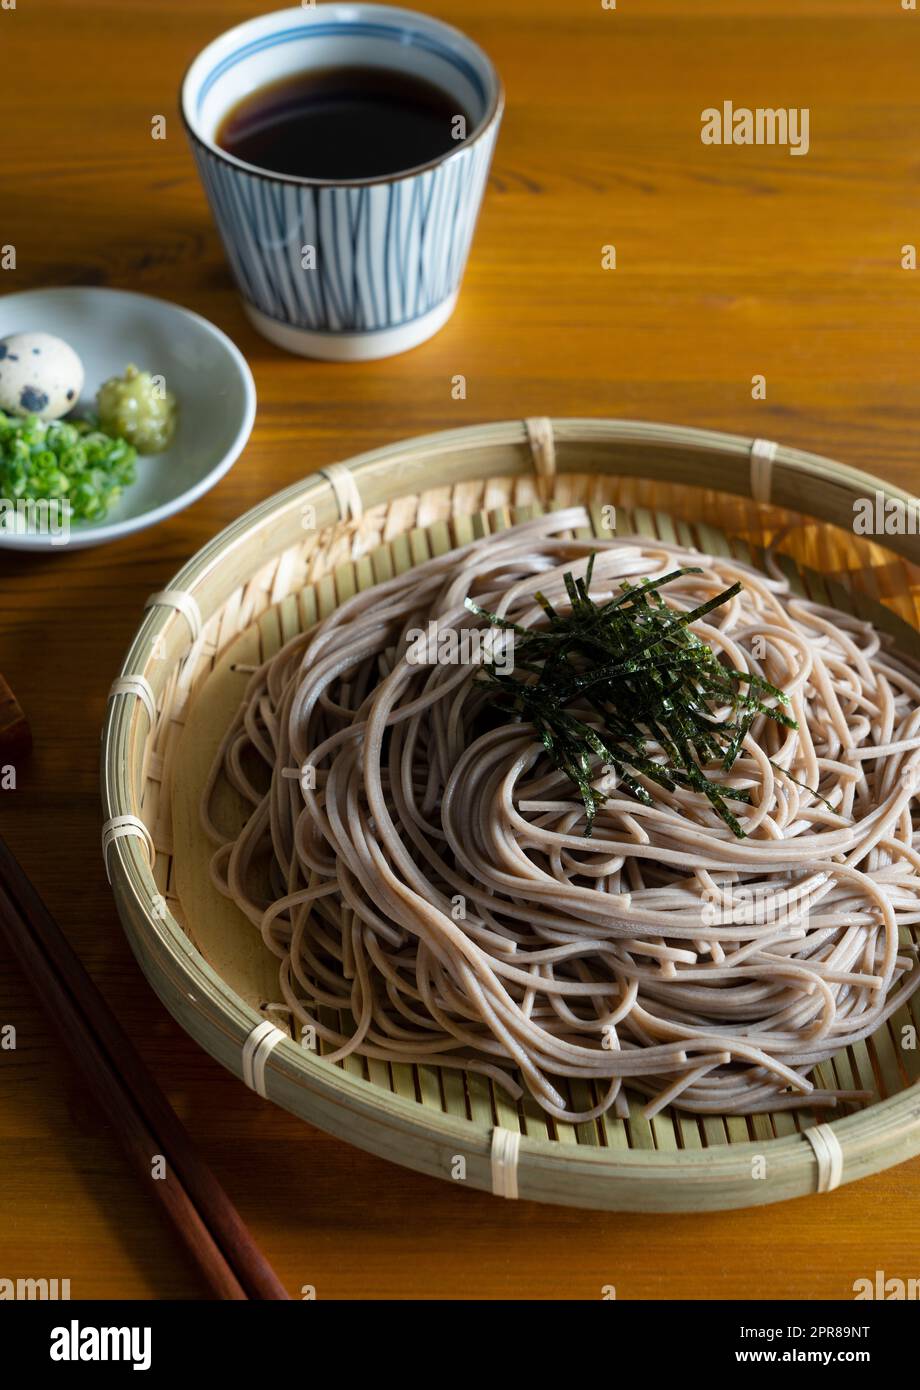 Zaru-soba and condiments on a wooden table. Stock Photo